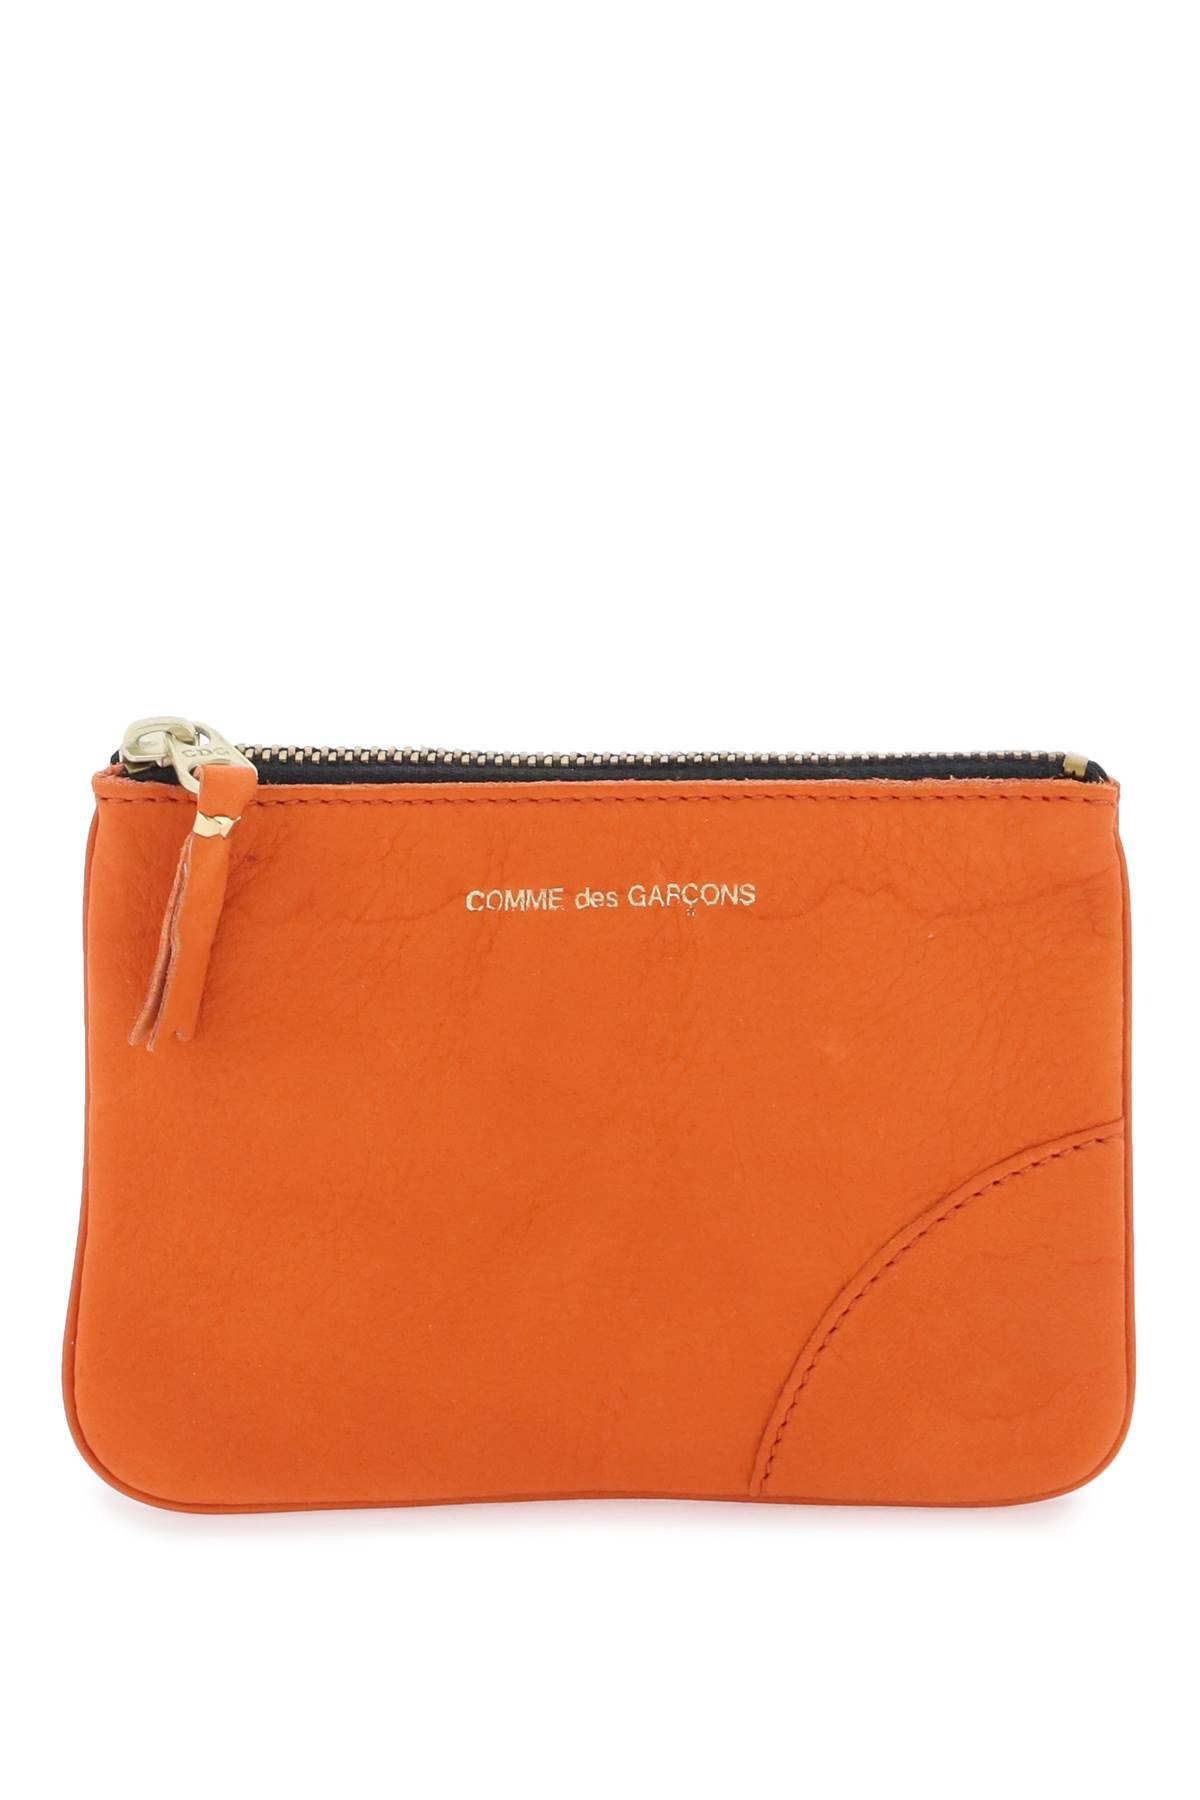 COMME DES GARCONS WALLET COMME DES GARCONS WALLET leather coin purse